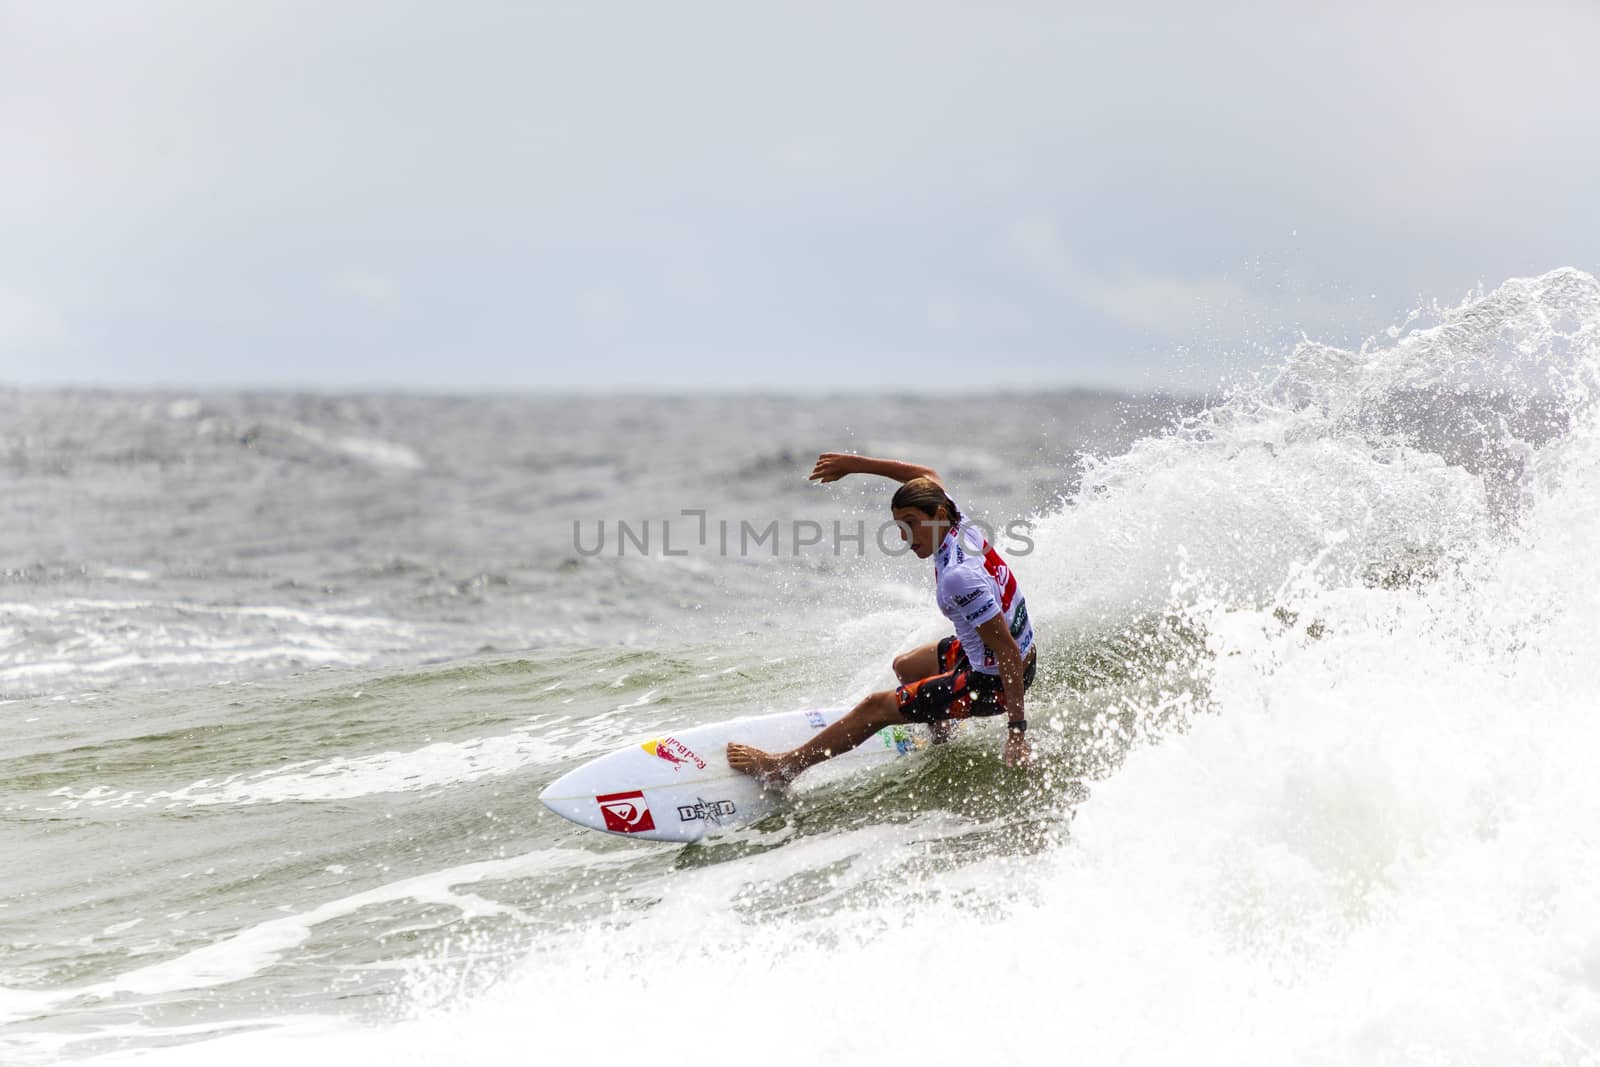 Surfer races the Quicksilver & Roxy Pro World Title Event by Imagecom